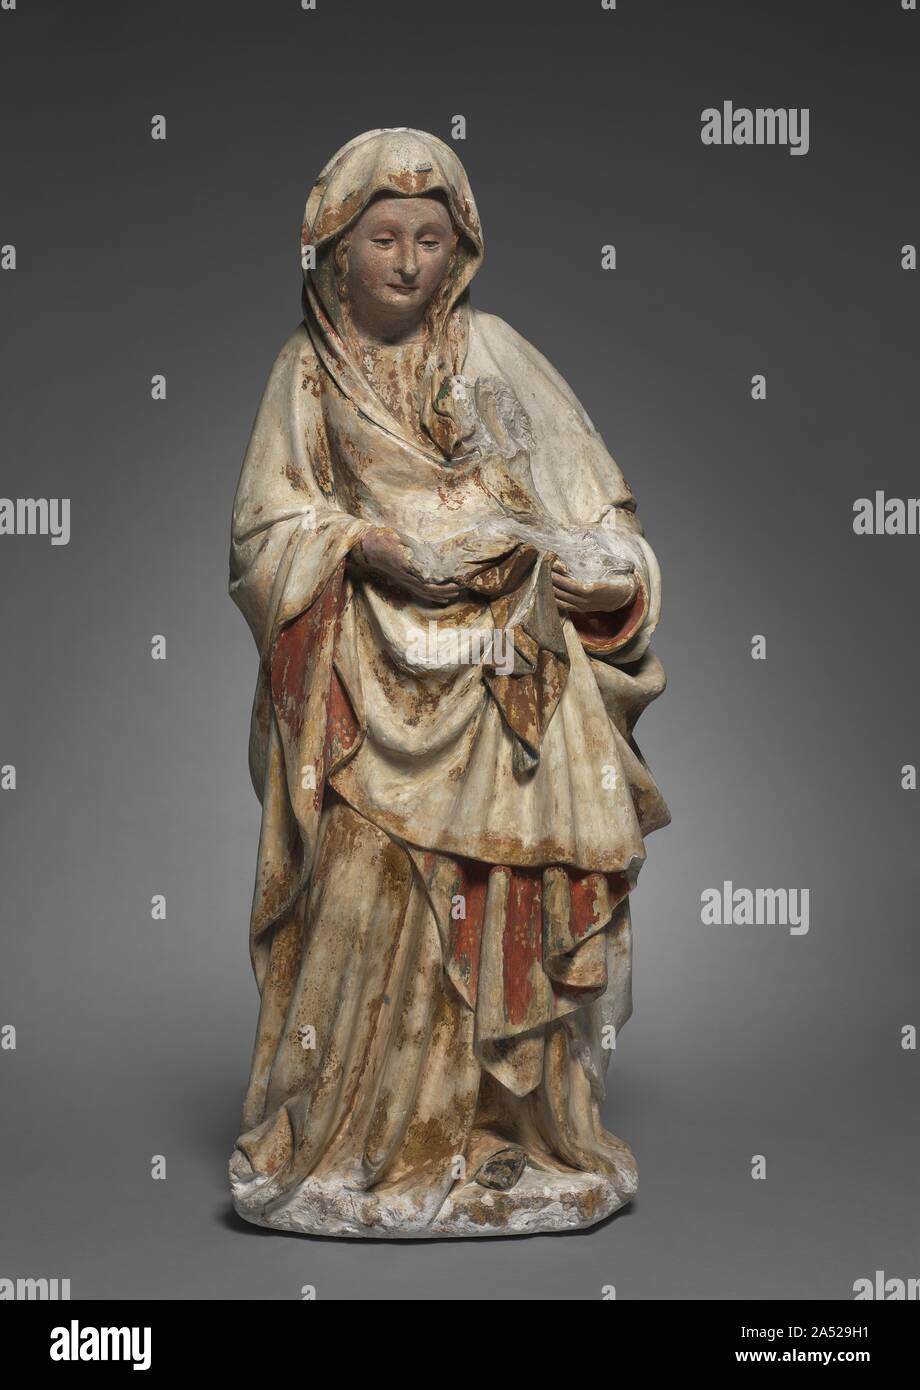 Standing Virgin, c. 1440-1450. This standing Virgin now lacks the child she once cradled in her left arm. The sculpture may have been damaged in the French Revolution by falling onto its face. It was carved from soft white limestone of a type known to be quarried at Asni&#xe8;res-l&#xe8;s-Dijon, near Champmol. The figure recalls many of the hallmarks of the style of Claus de Werve, a Netherlandish artist active at the court of Burgundy. The Virgin has a sweet, round face that is also smooth and fleshy, her eyelids droop pensively and she is engulfed in rich voluminous draperies that cascade in Stock Photo